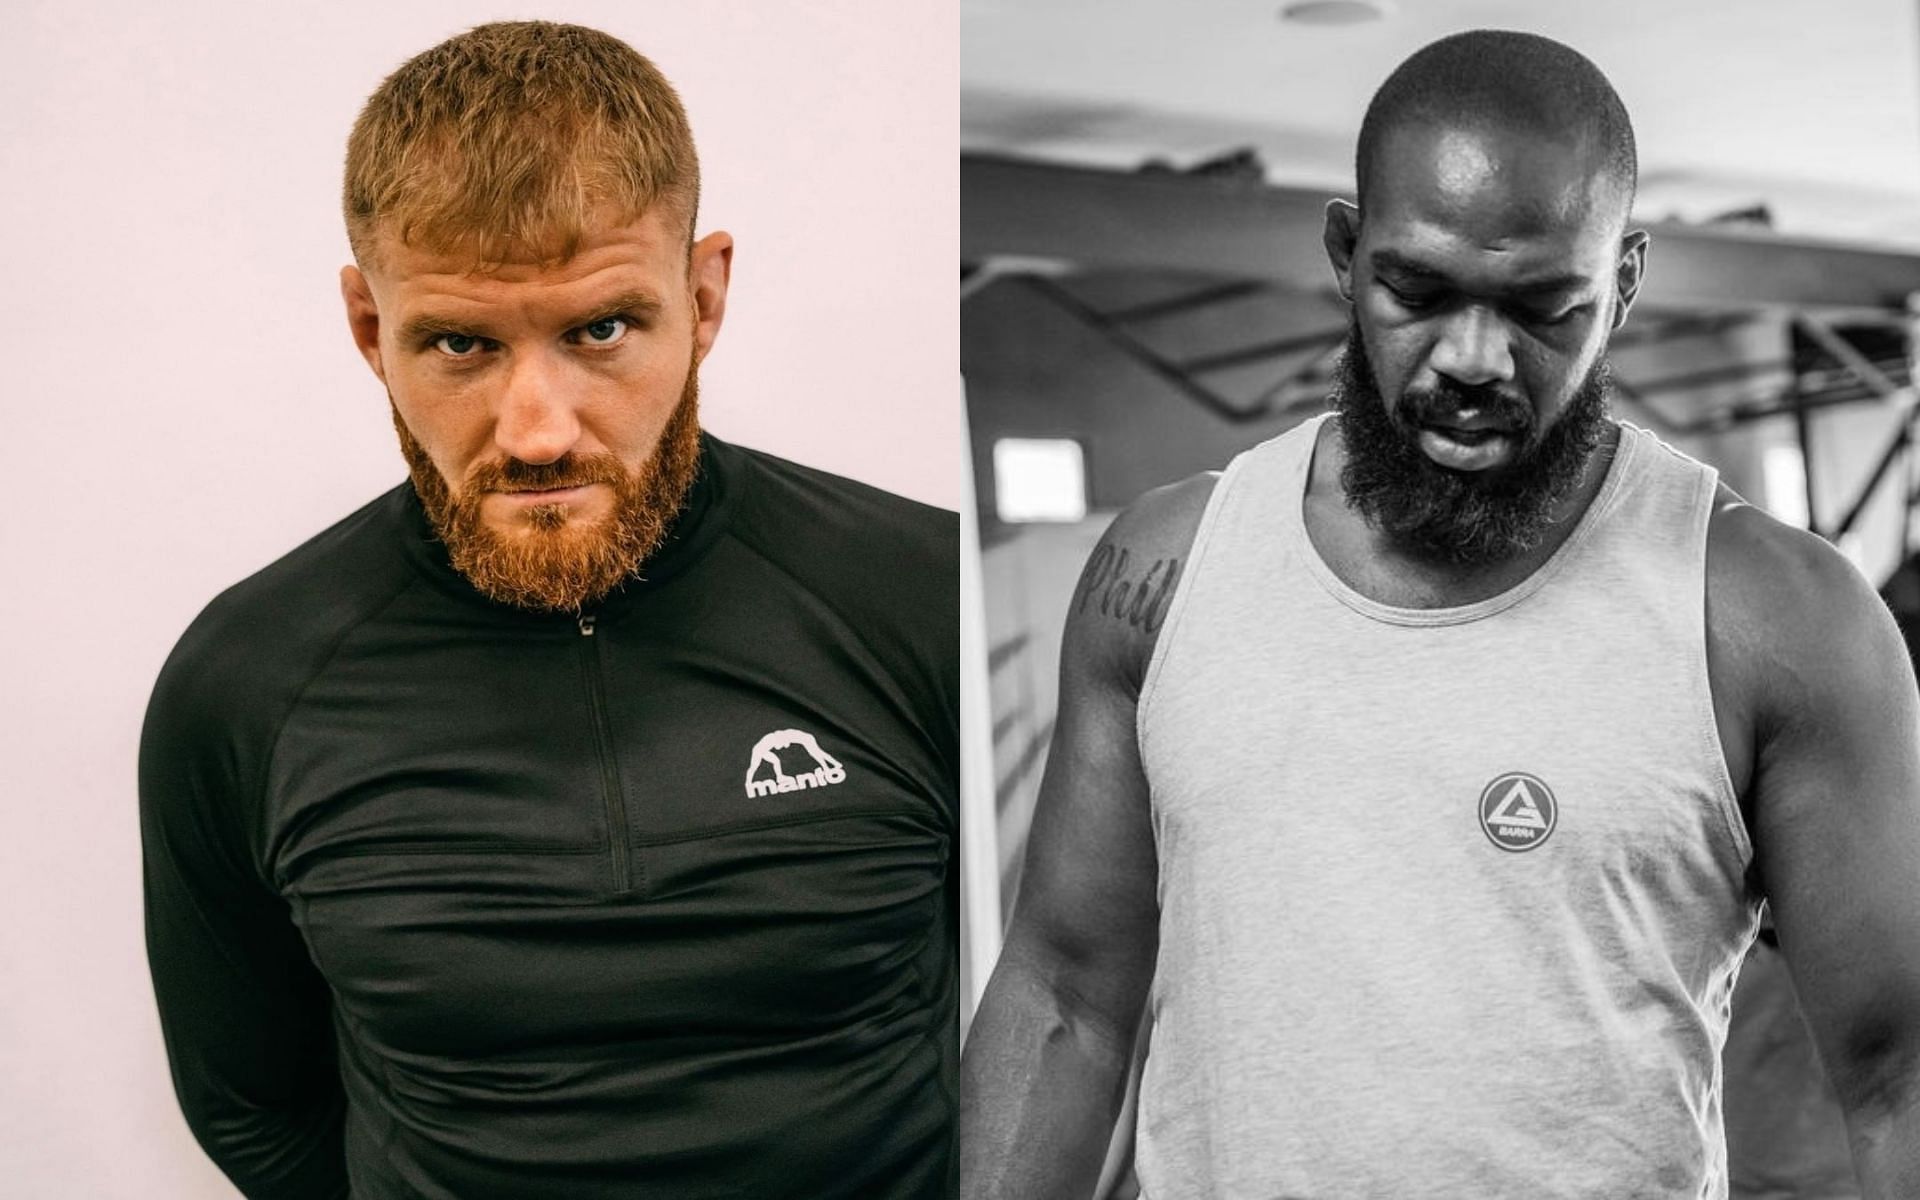 Jan Blachowicz believes Jon Jones ‘will do everything to not come back’ to fighting: “He’s afraid to lose”